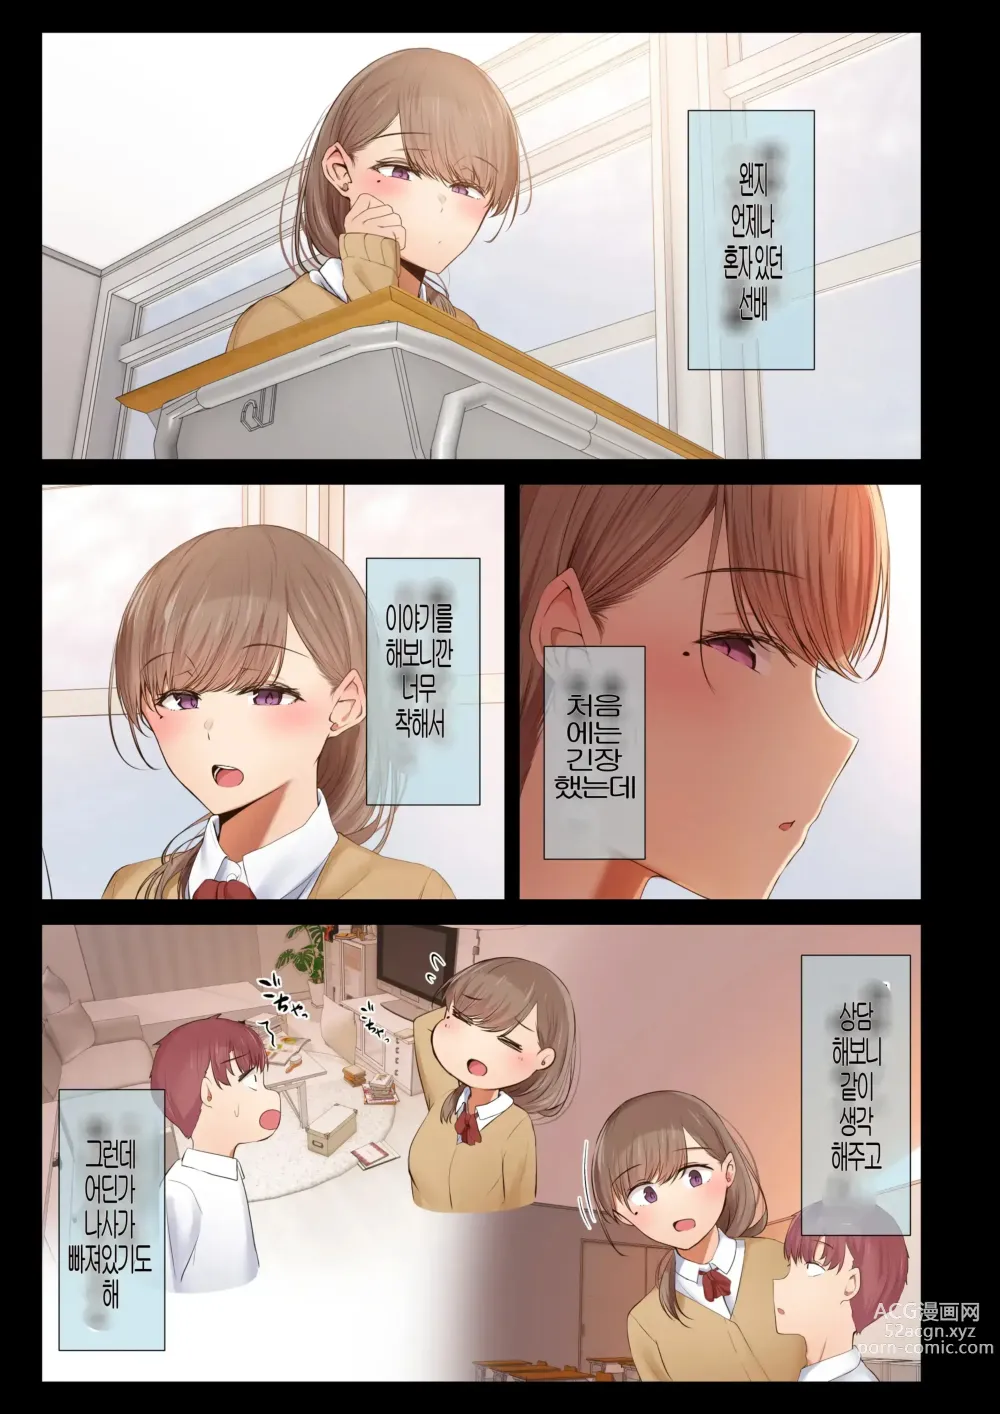 Page 4 of doujinshi A story about my favorite senior, who can be trusted, is made into a female by Yarichin. 의지할수 있는 선배가 야한친구에 의해 암컷이된 이야기